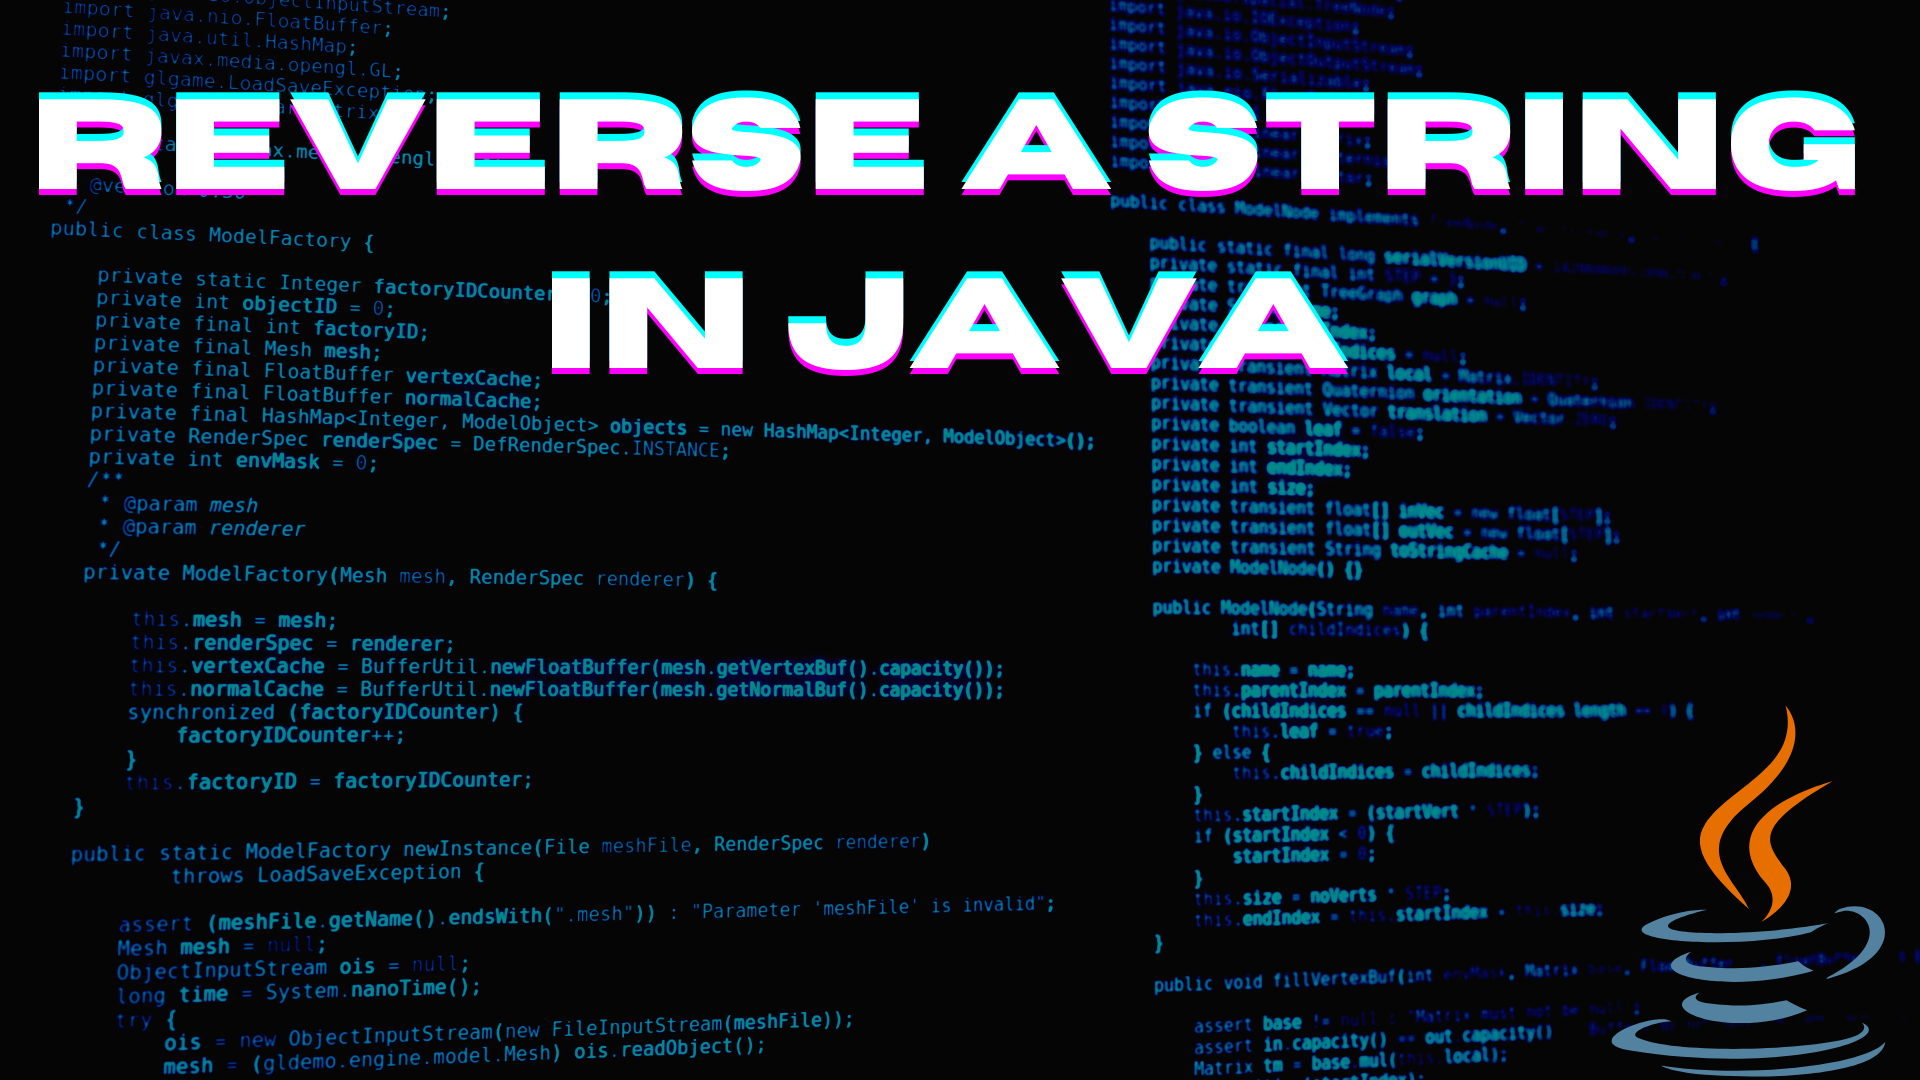 Reverse a String in Java